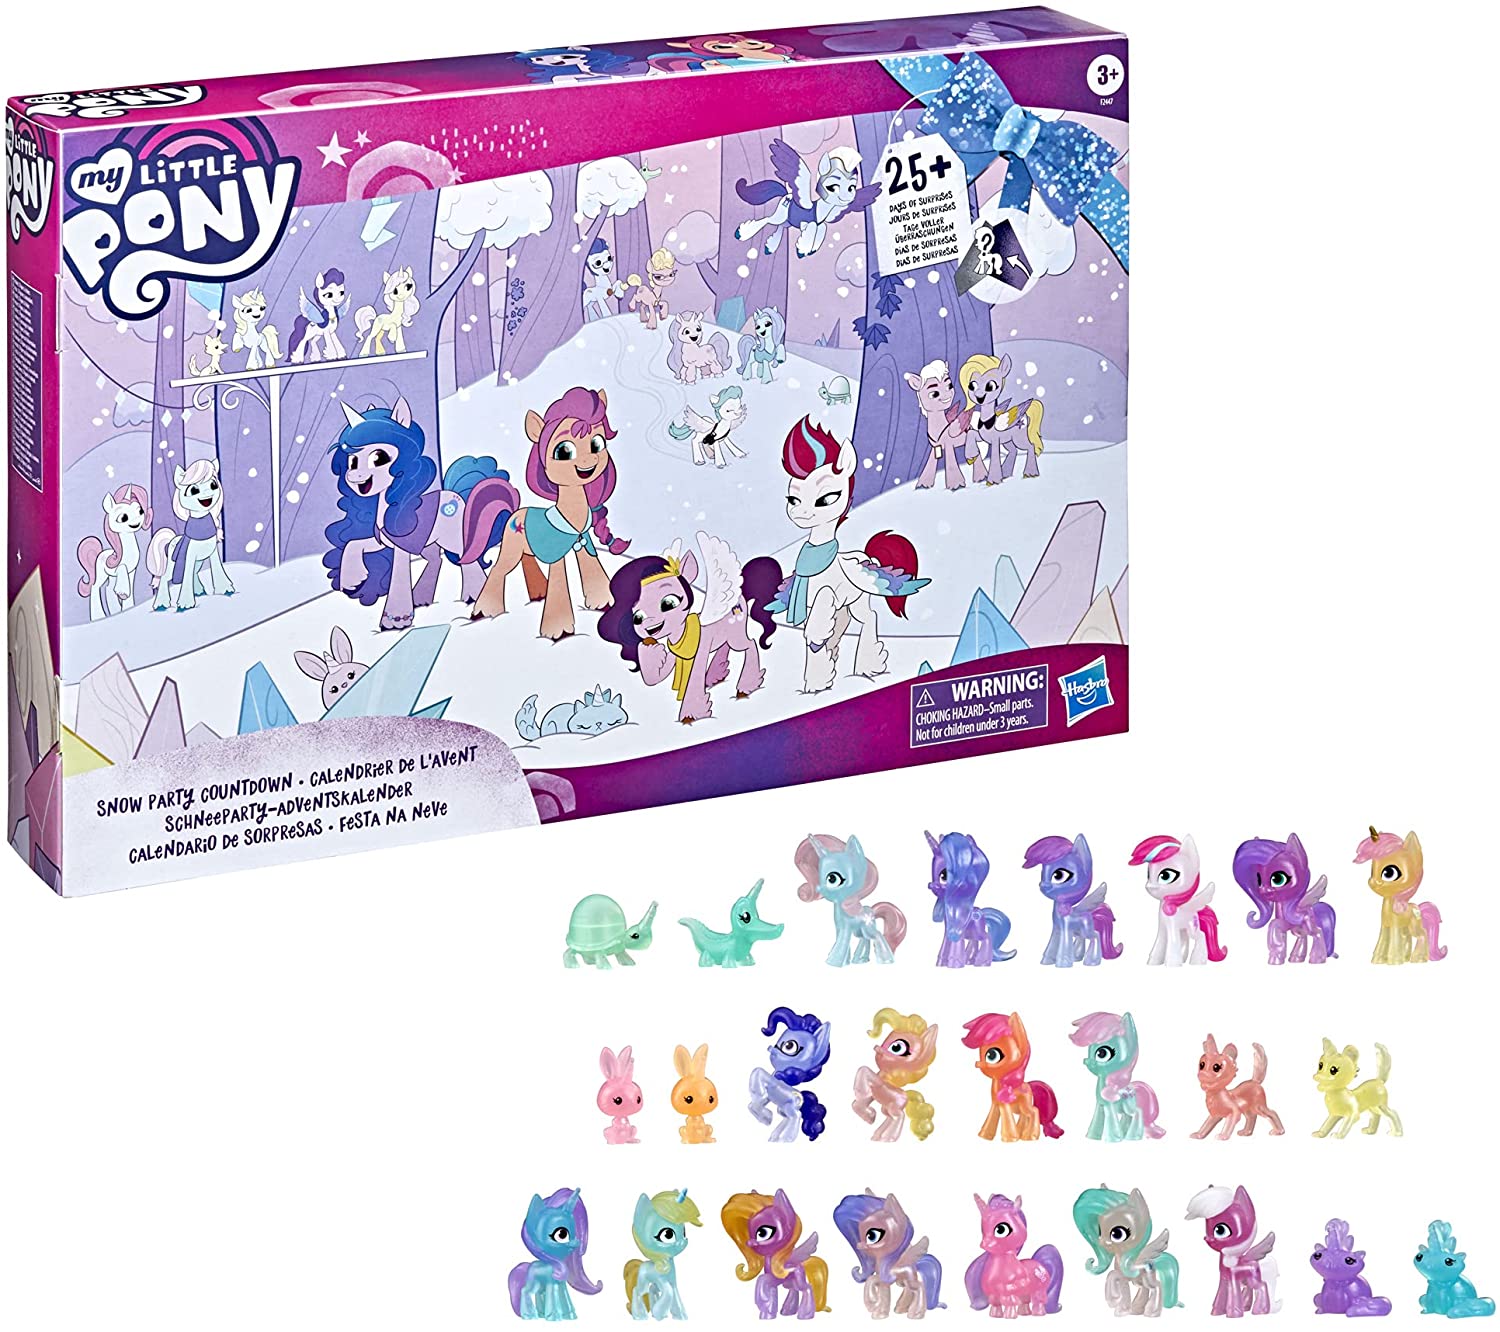 New My Little Pony A New Generation Snow Party Countdown Advent Calendar Toy Set Available Now My Little Pony Movie Toys